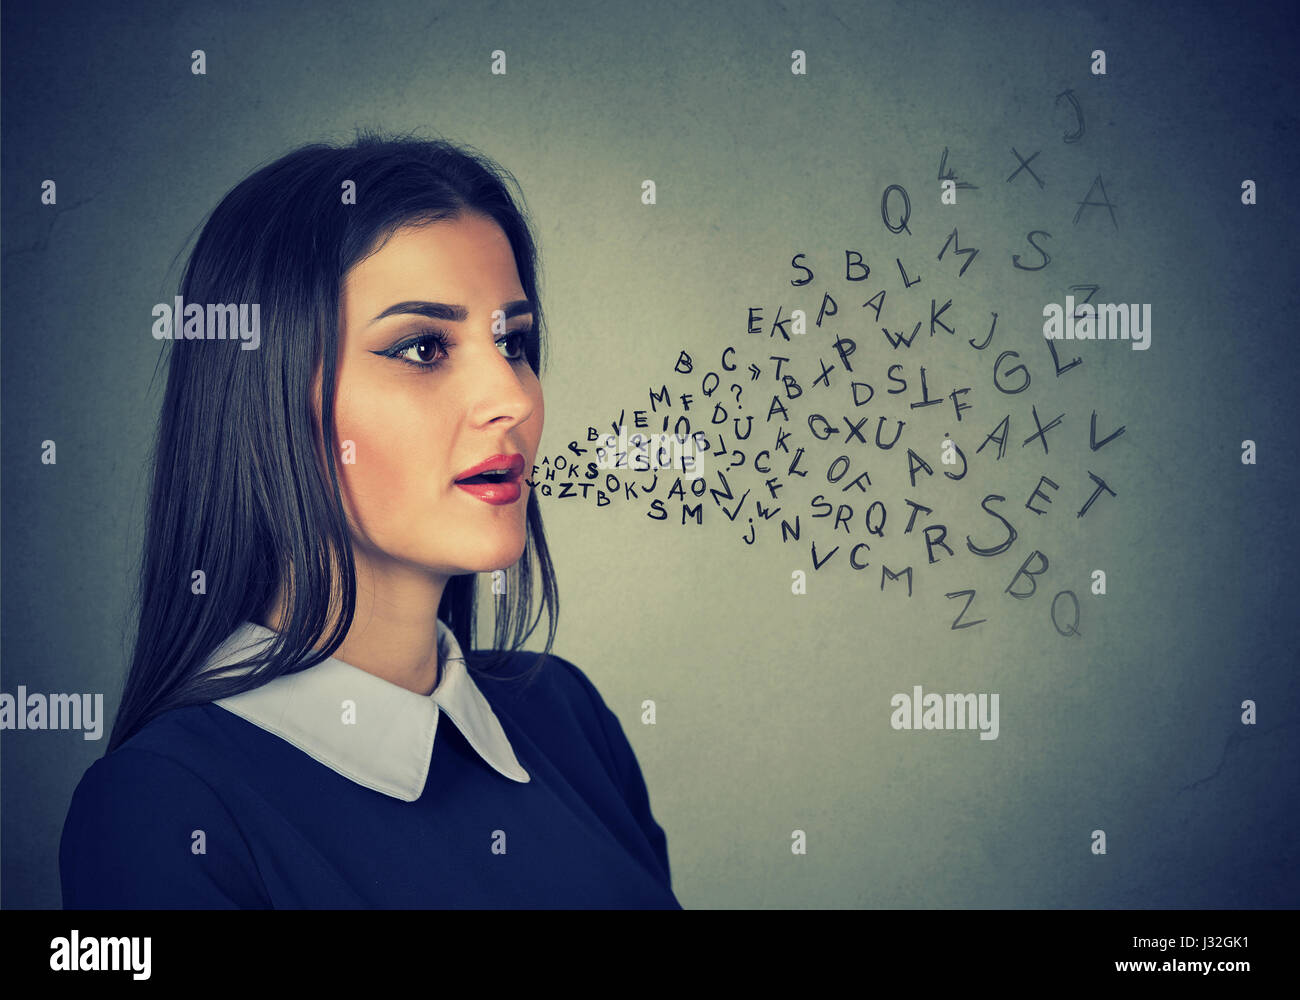 Woman talking with alphabet letters coming out of her mouth. Communication, information, intelligence concept Stock Photo